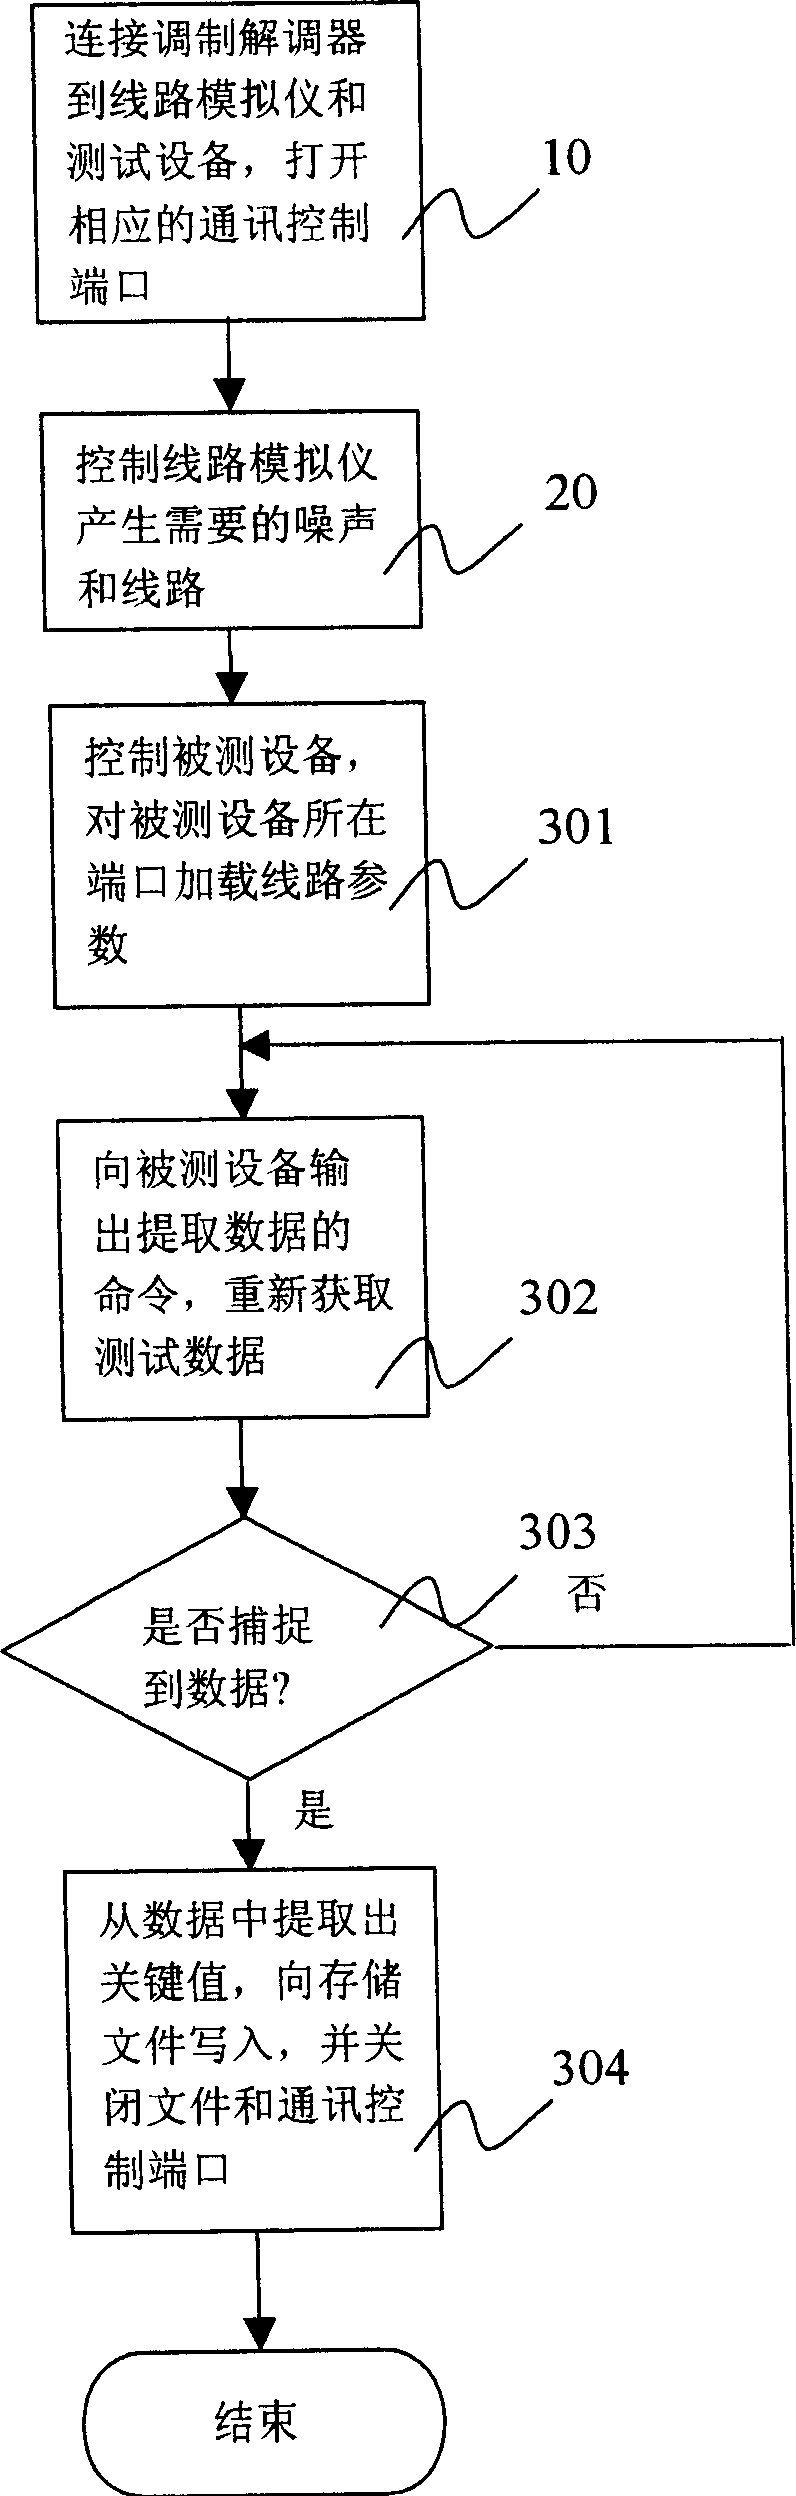 Automatic testing method for modulating and demodulation unit and its testing system